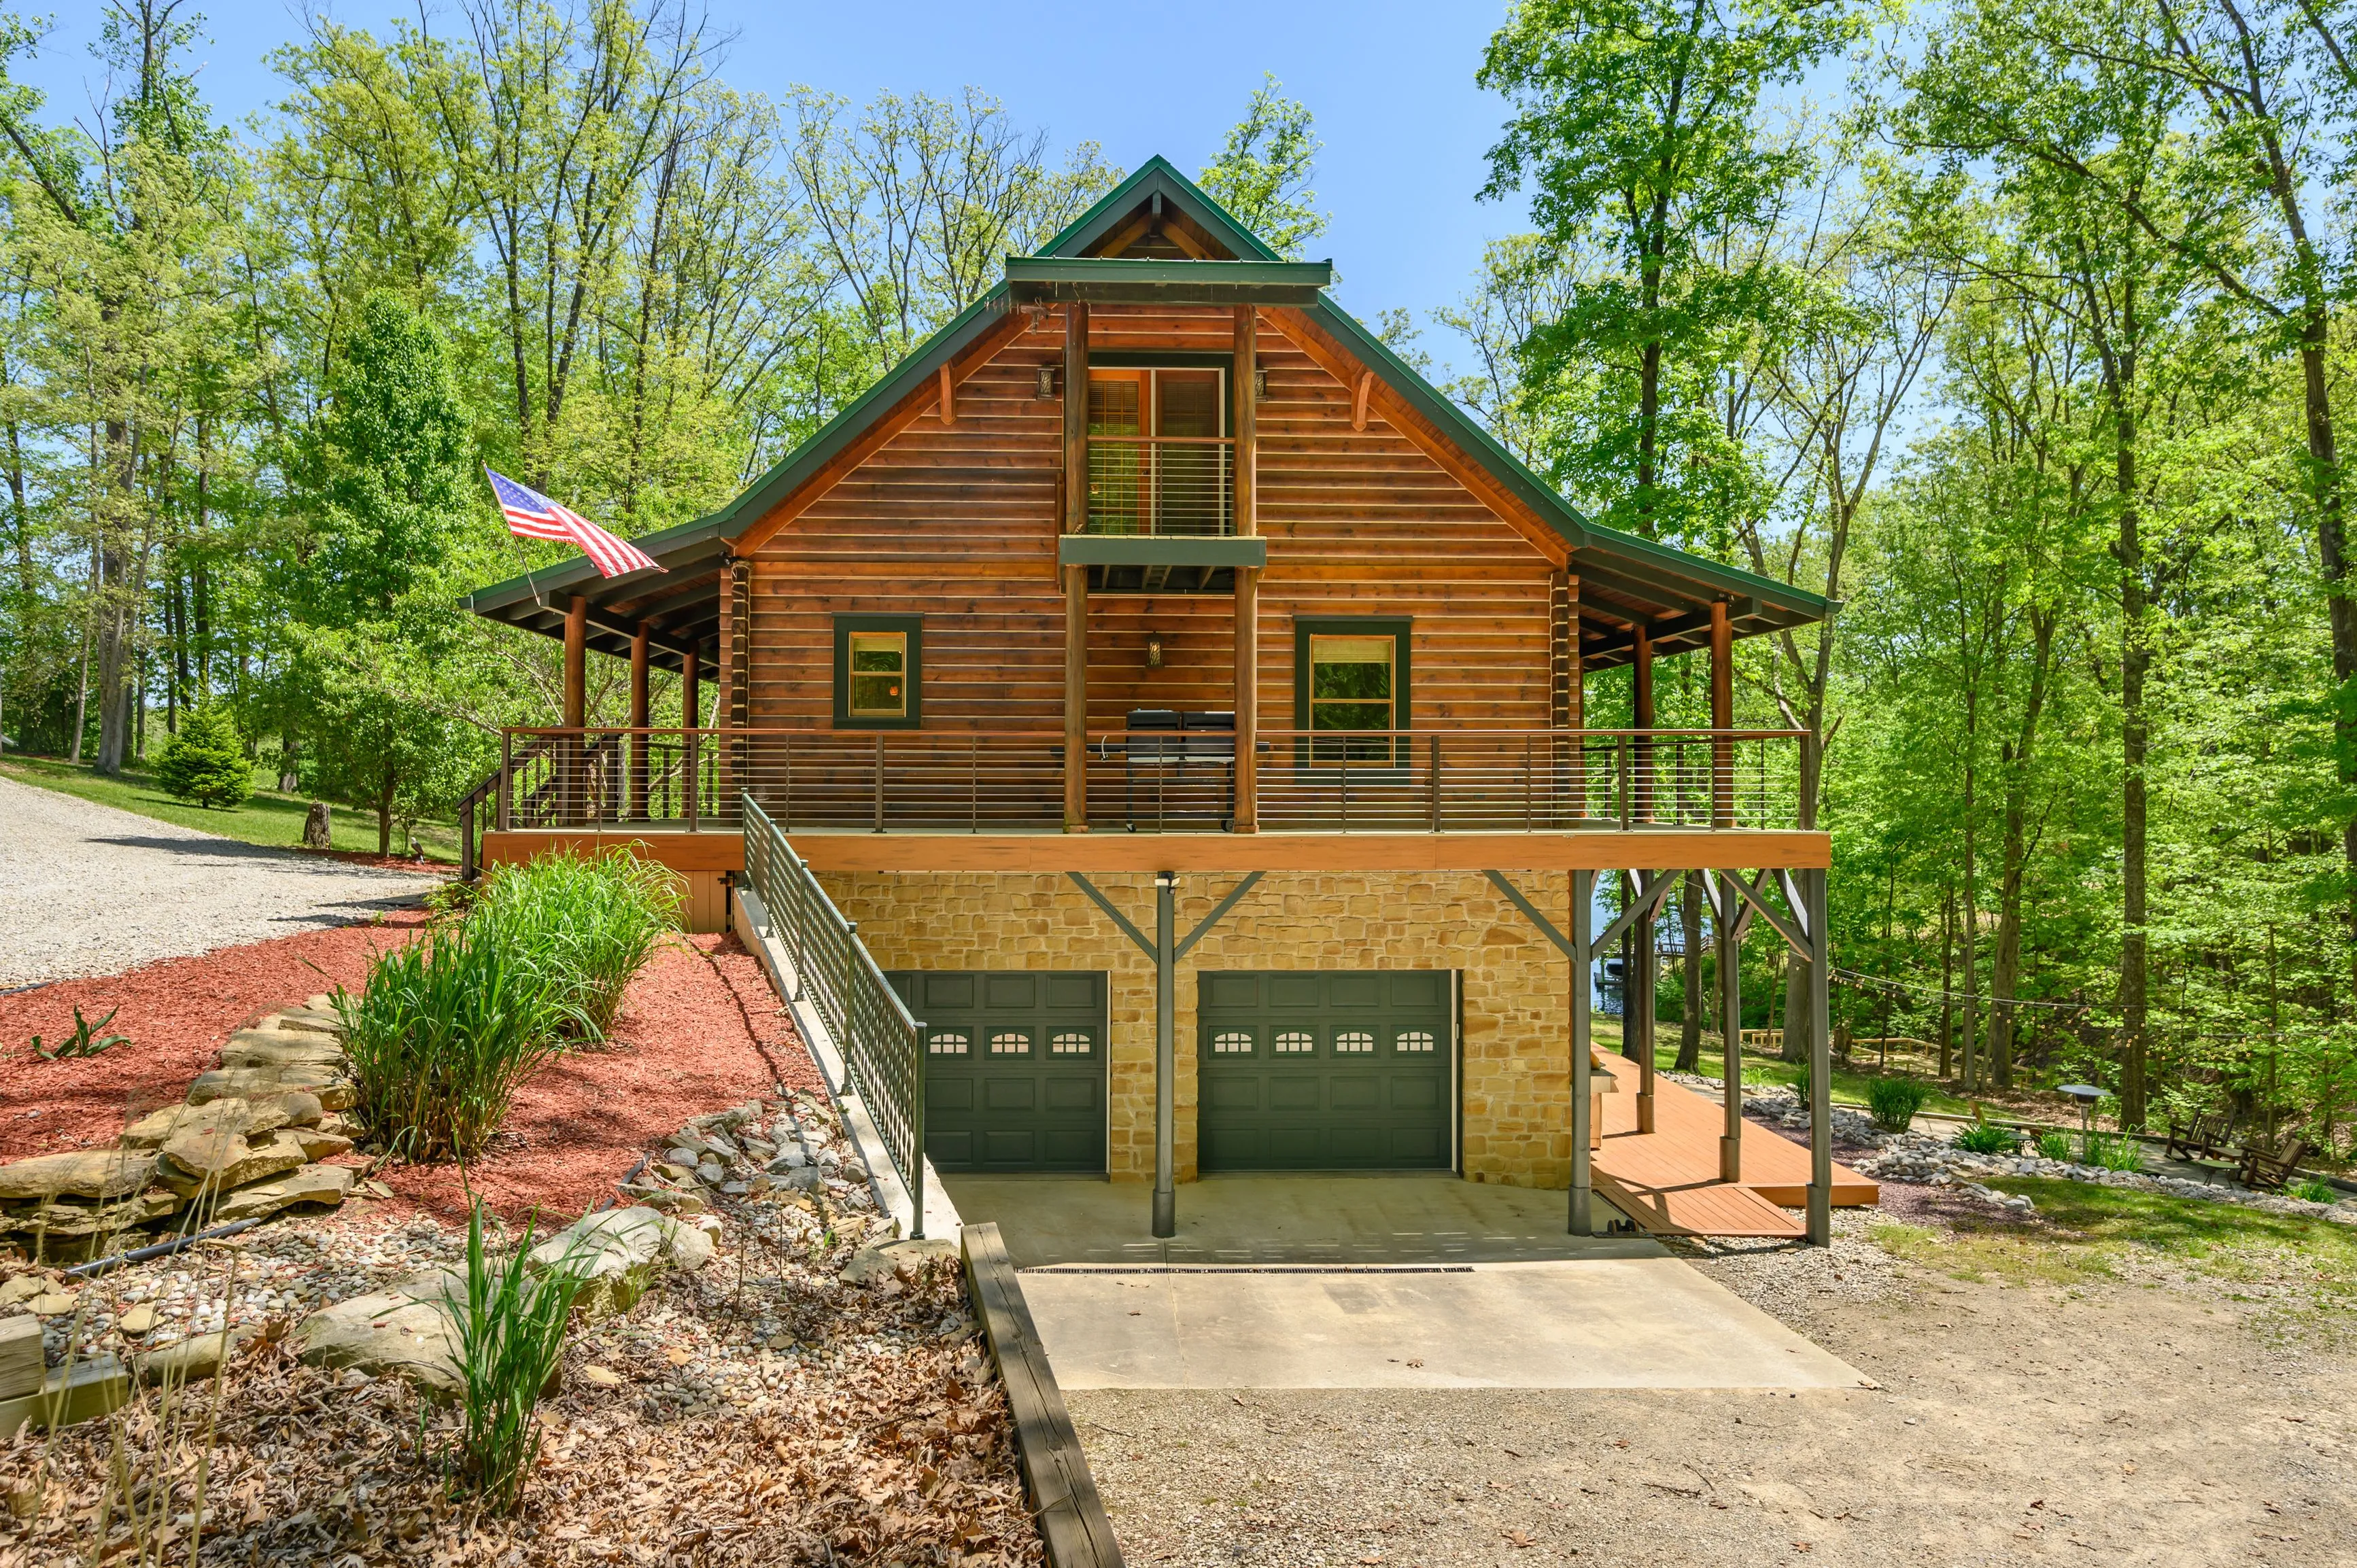 A wooden cabin with a spacious balcony, surrounded by green trees, featuring a stone foundation and a three-car garage beneath, with an American flag on display.